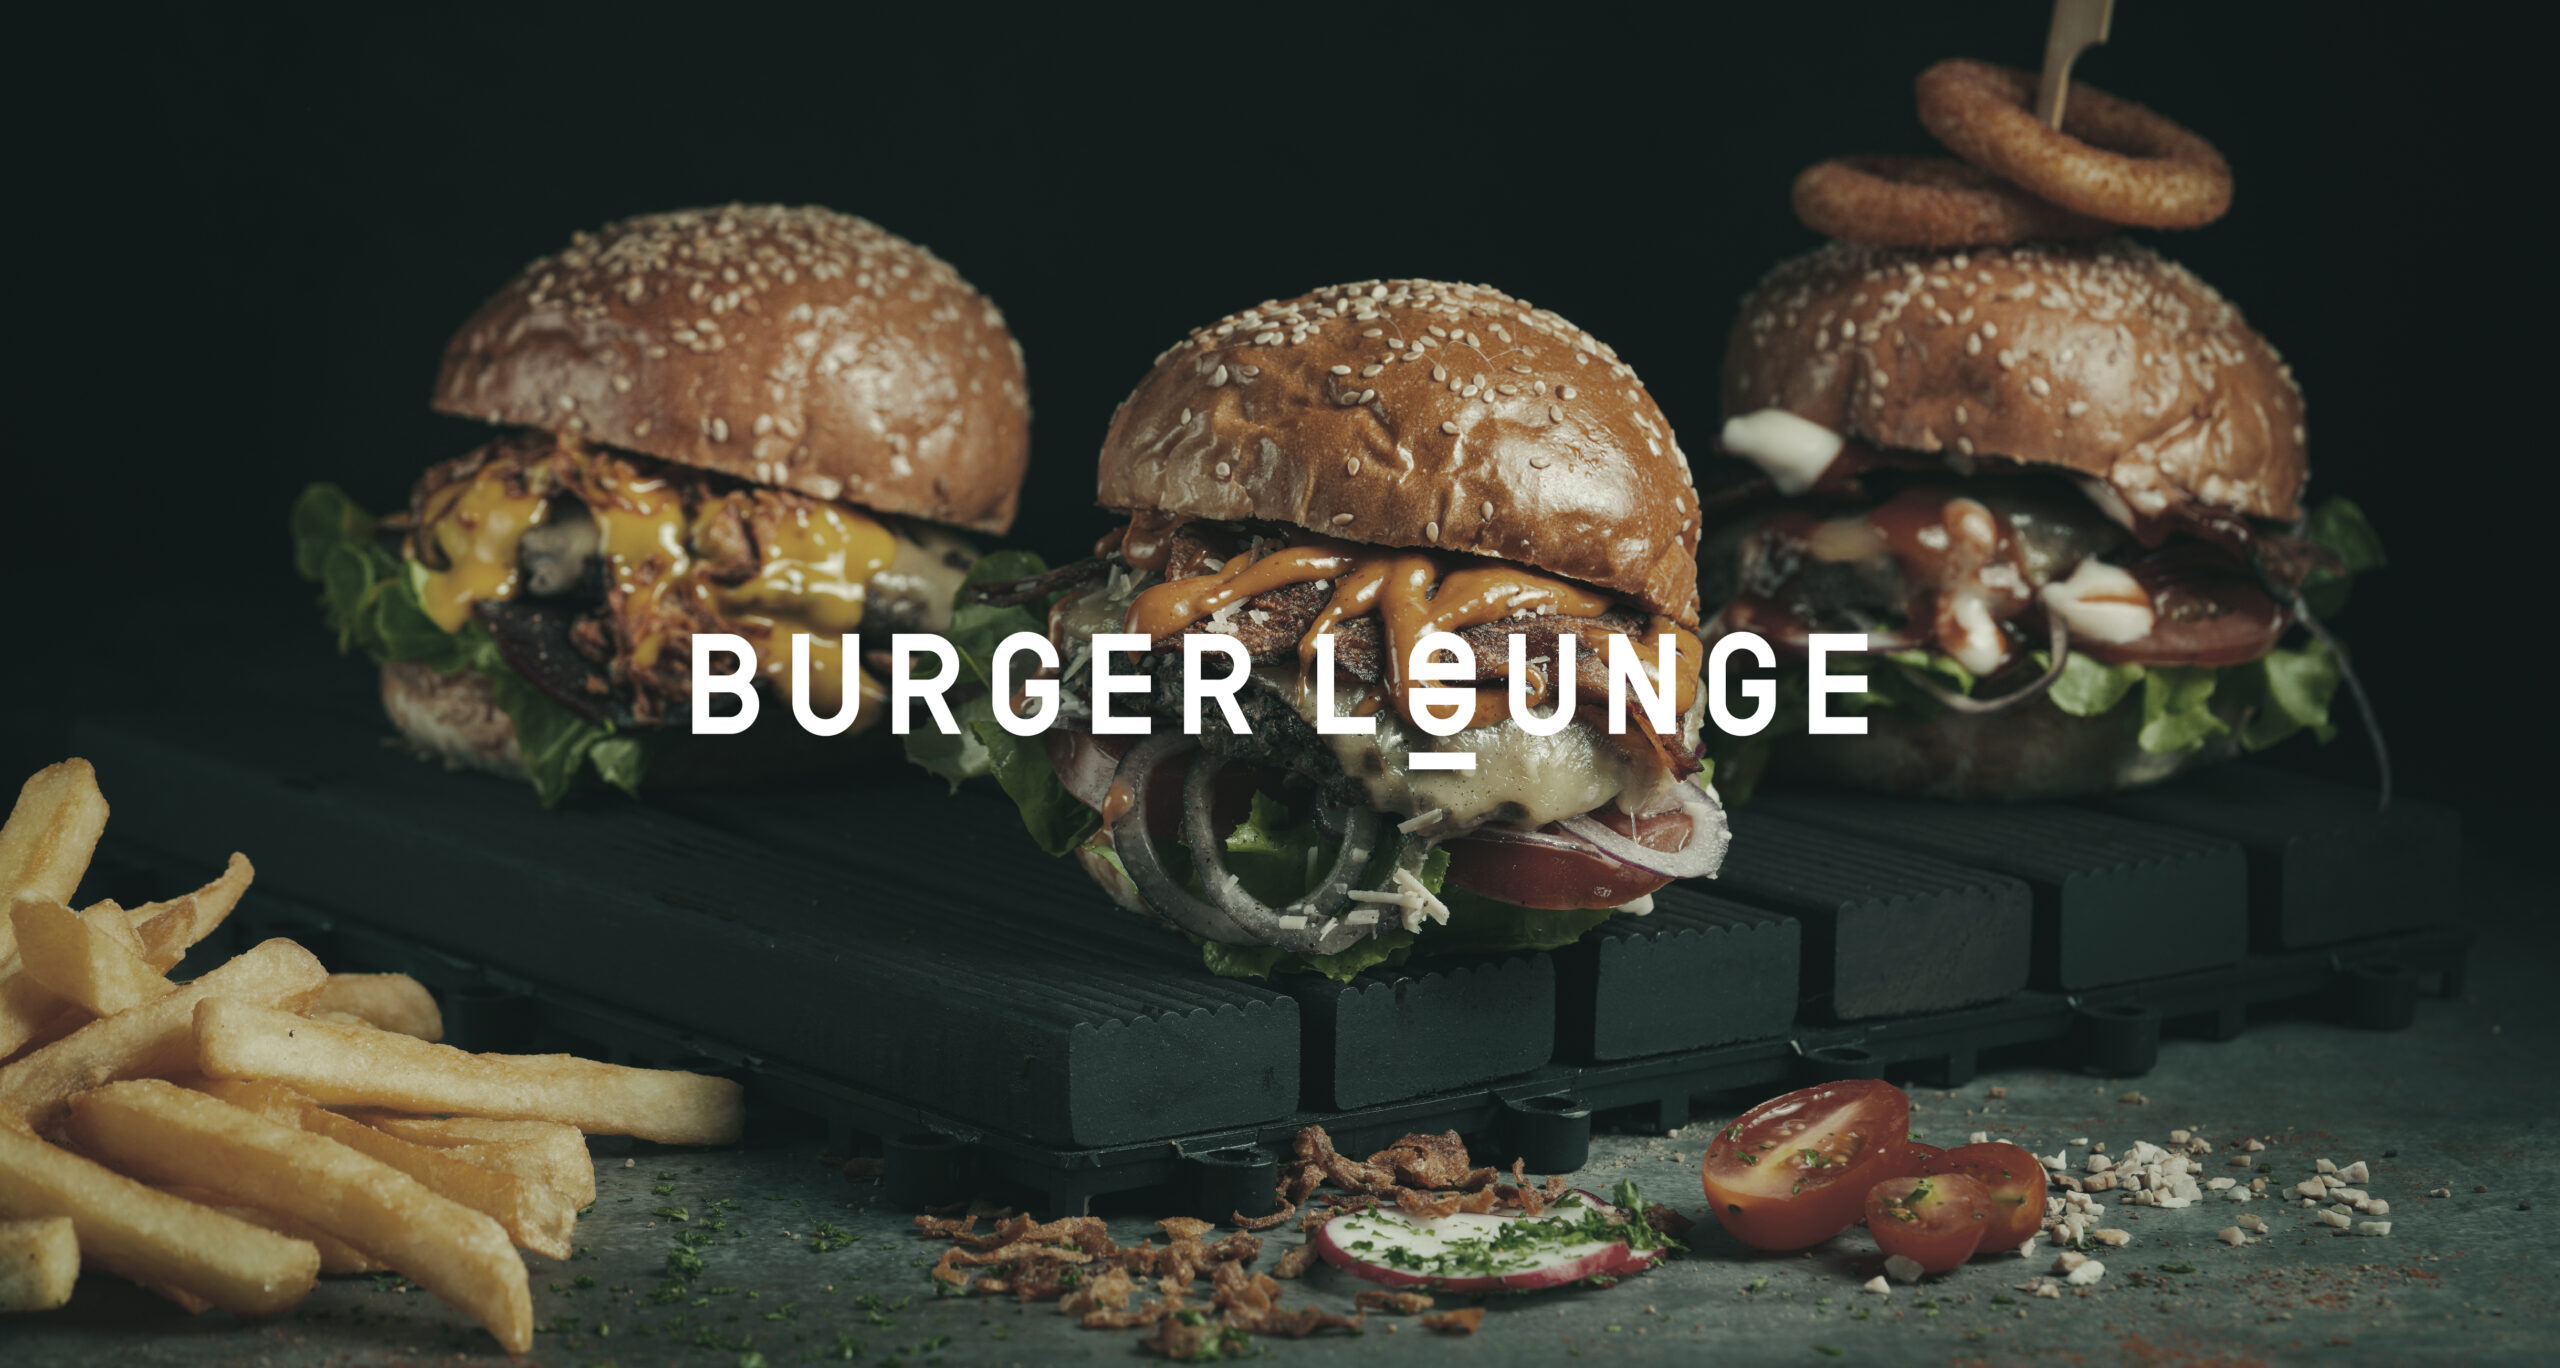 Burger-Lounge-Brand-Facelift-By-Millimeter-Creative-Agency-A01-06